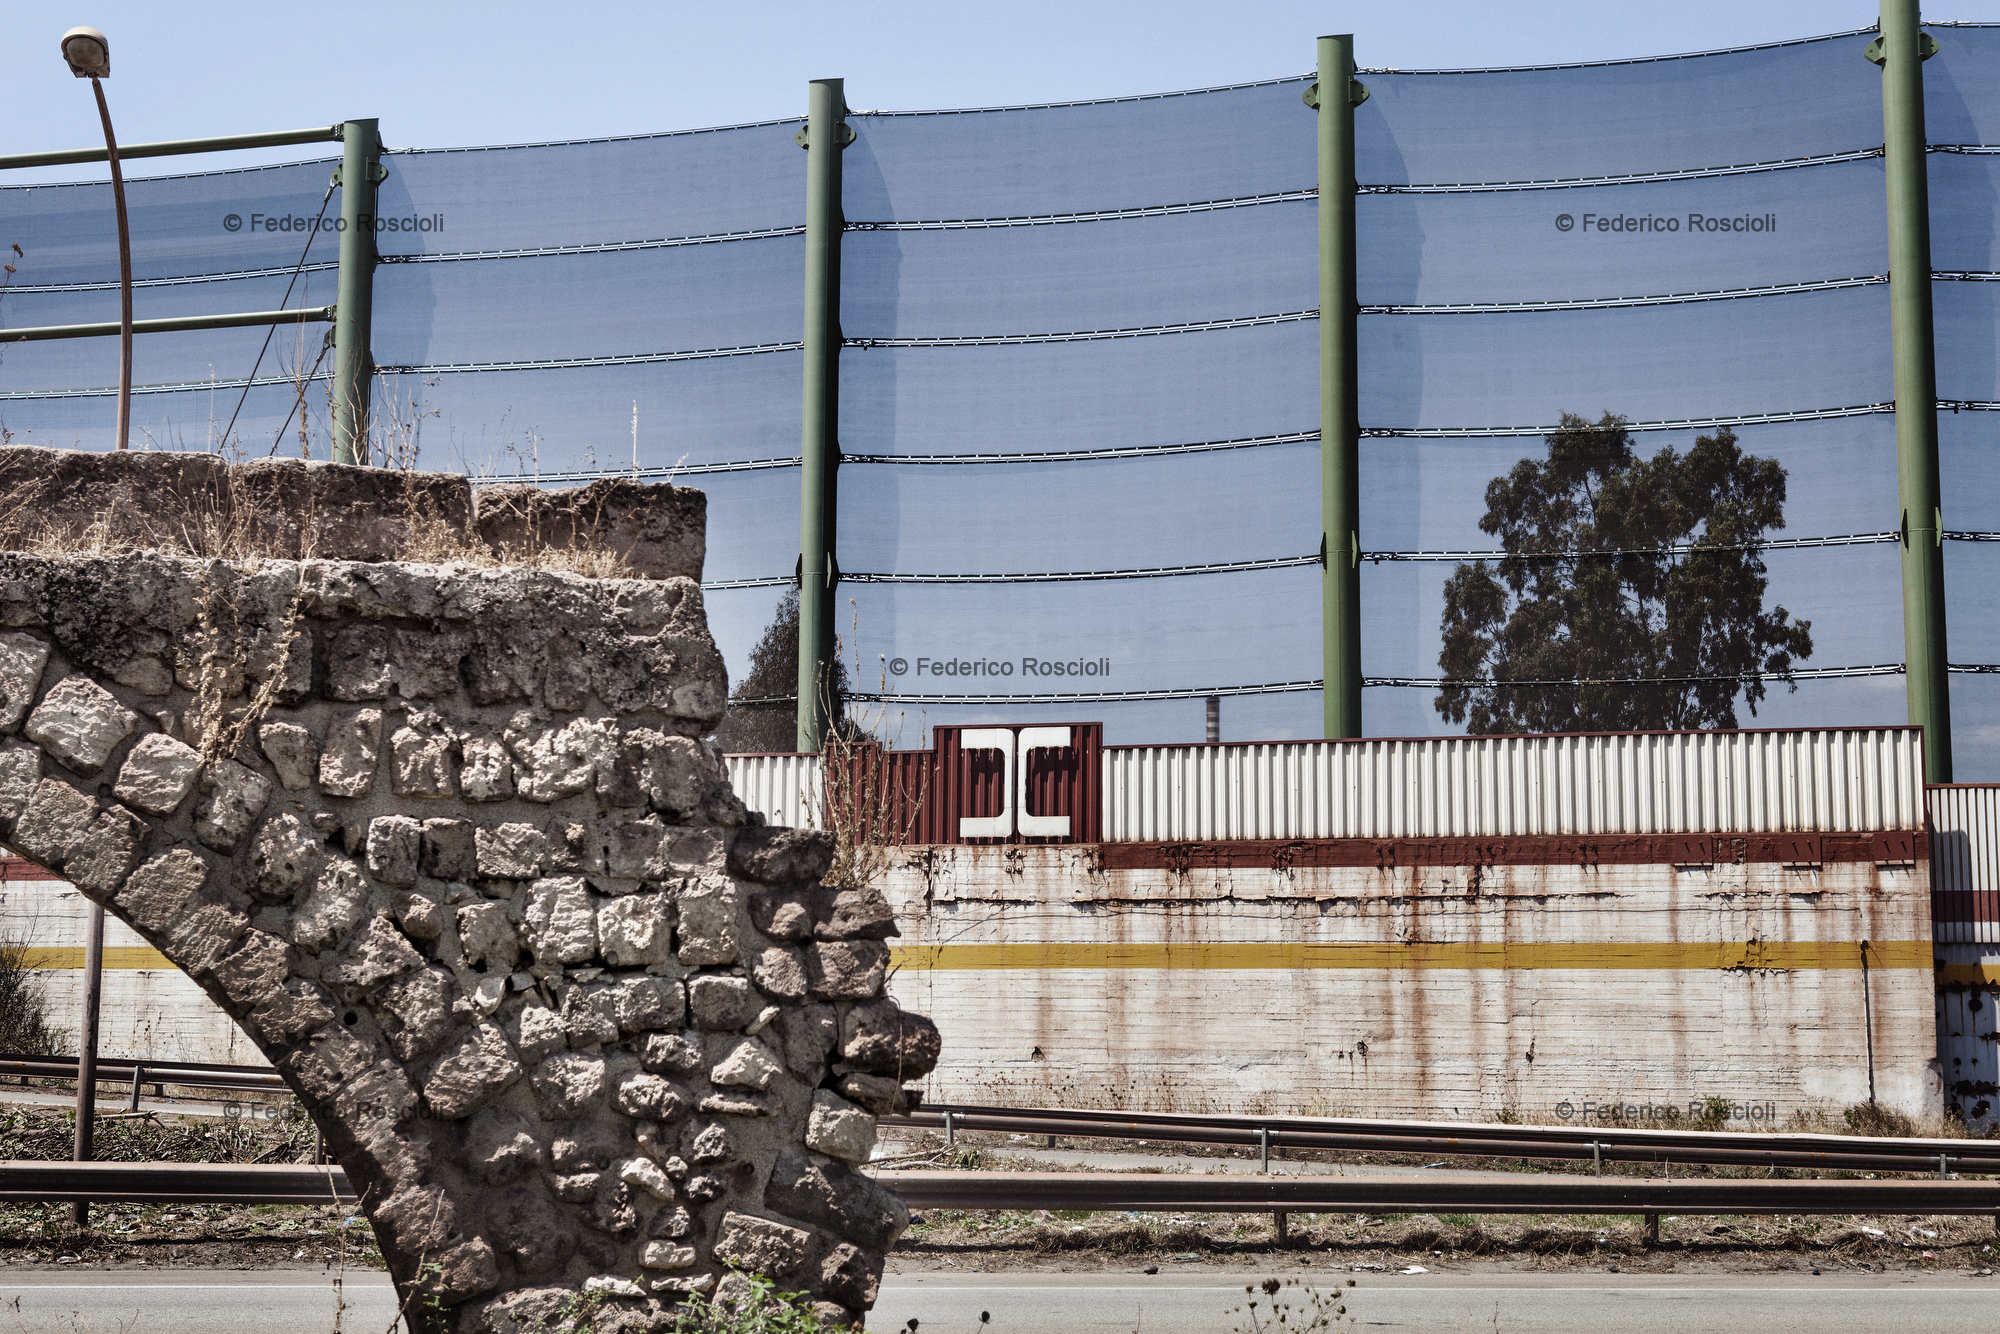 Taranto, Italy, August 1, 2013. Enclosure of Ilva factory in Taranto. The fence   over the wall was built in 2012 to protect the near neighborhood of Tamburi from the mineral dust coming from the implant. In foreground, the remains of the ancient Triglio aqueduct, belonging to Roman's eve. The Tamburi (drums) neighborhood is called so due to the sound made by the water dropping from the aqueduct.